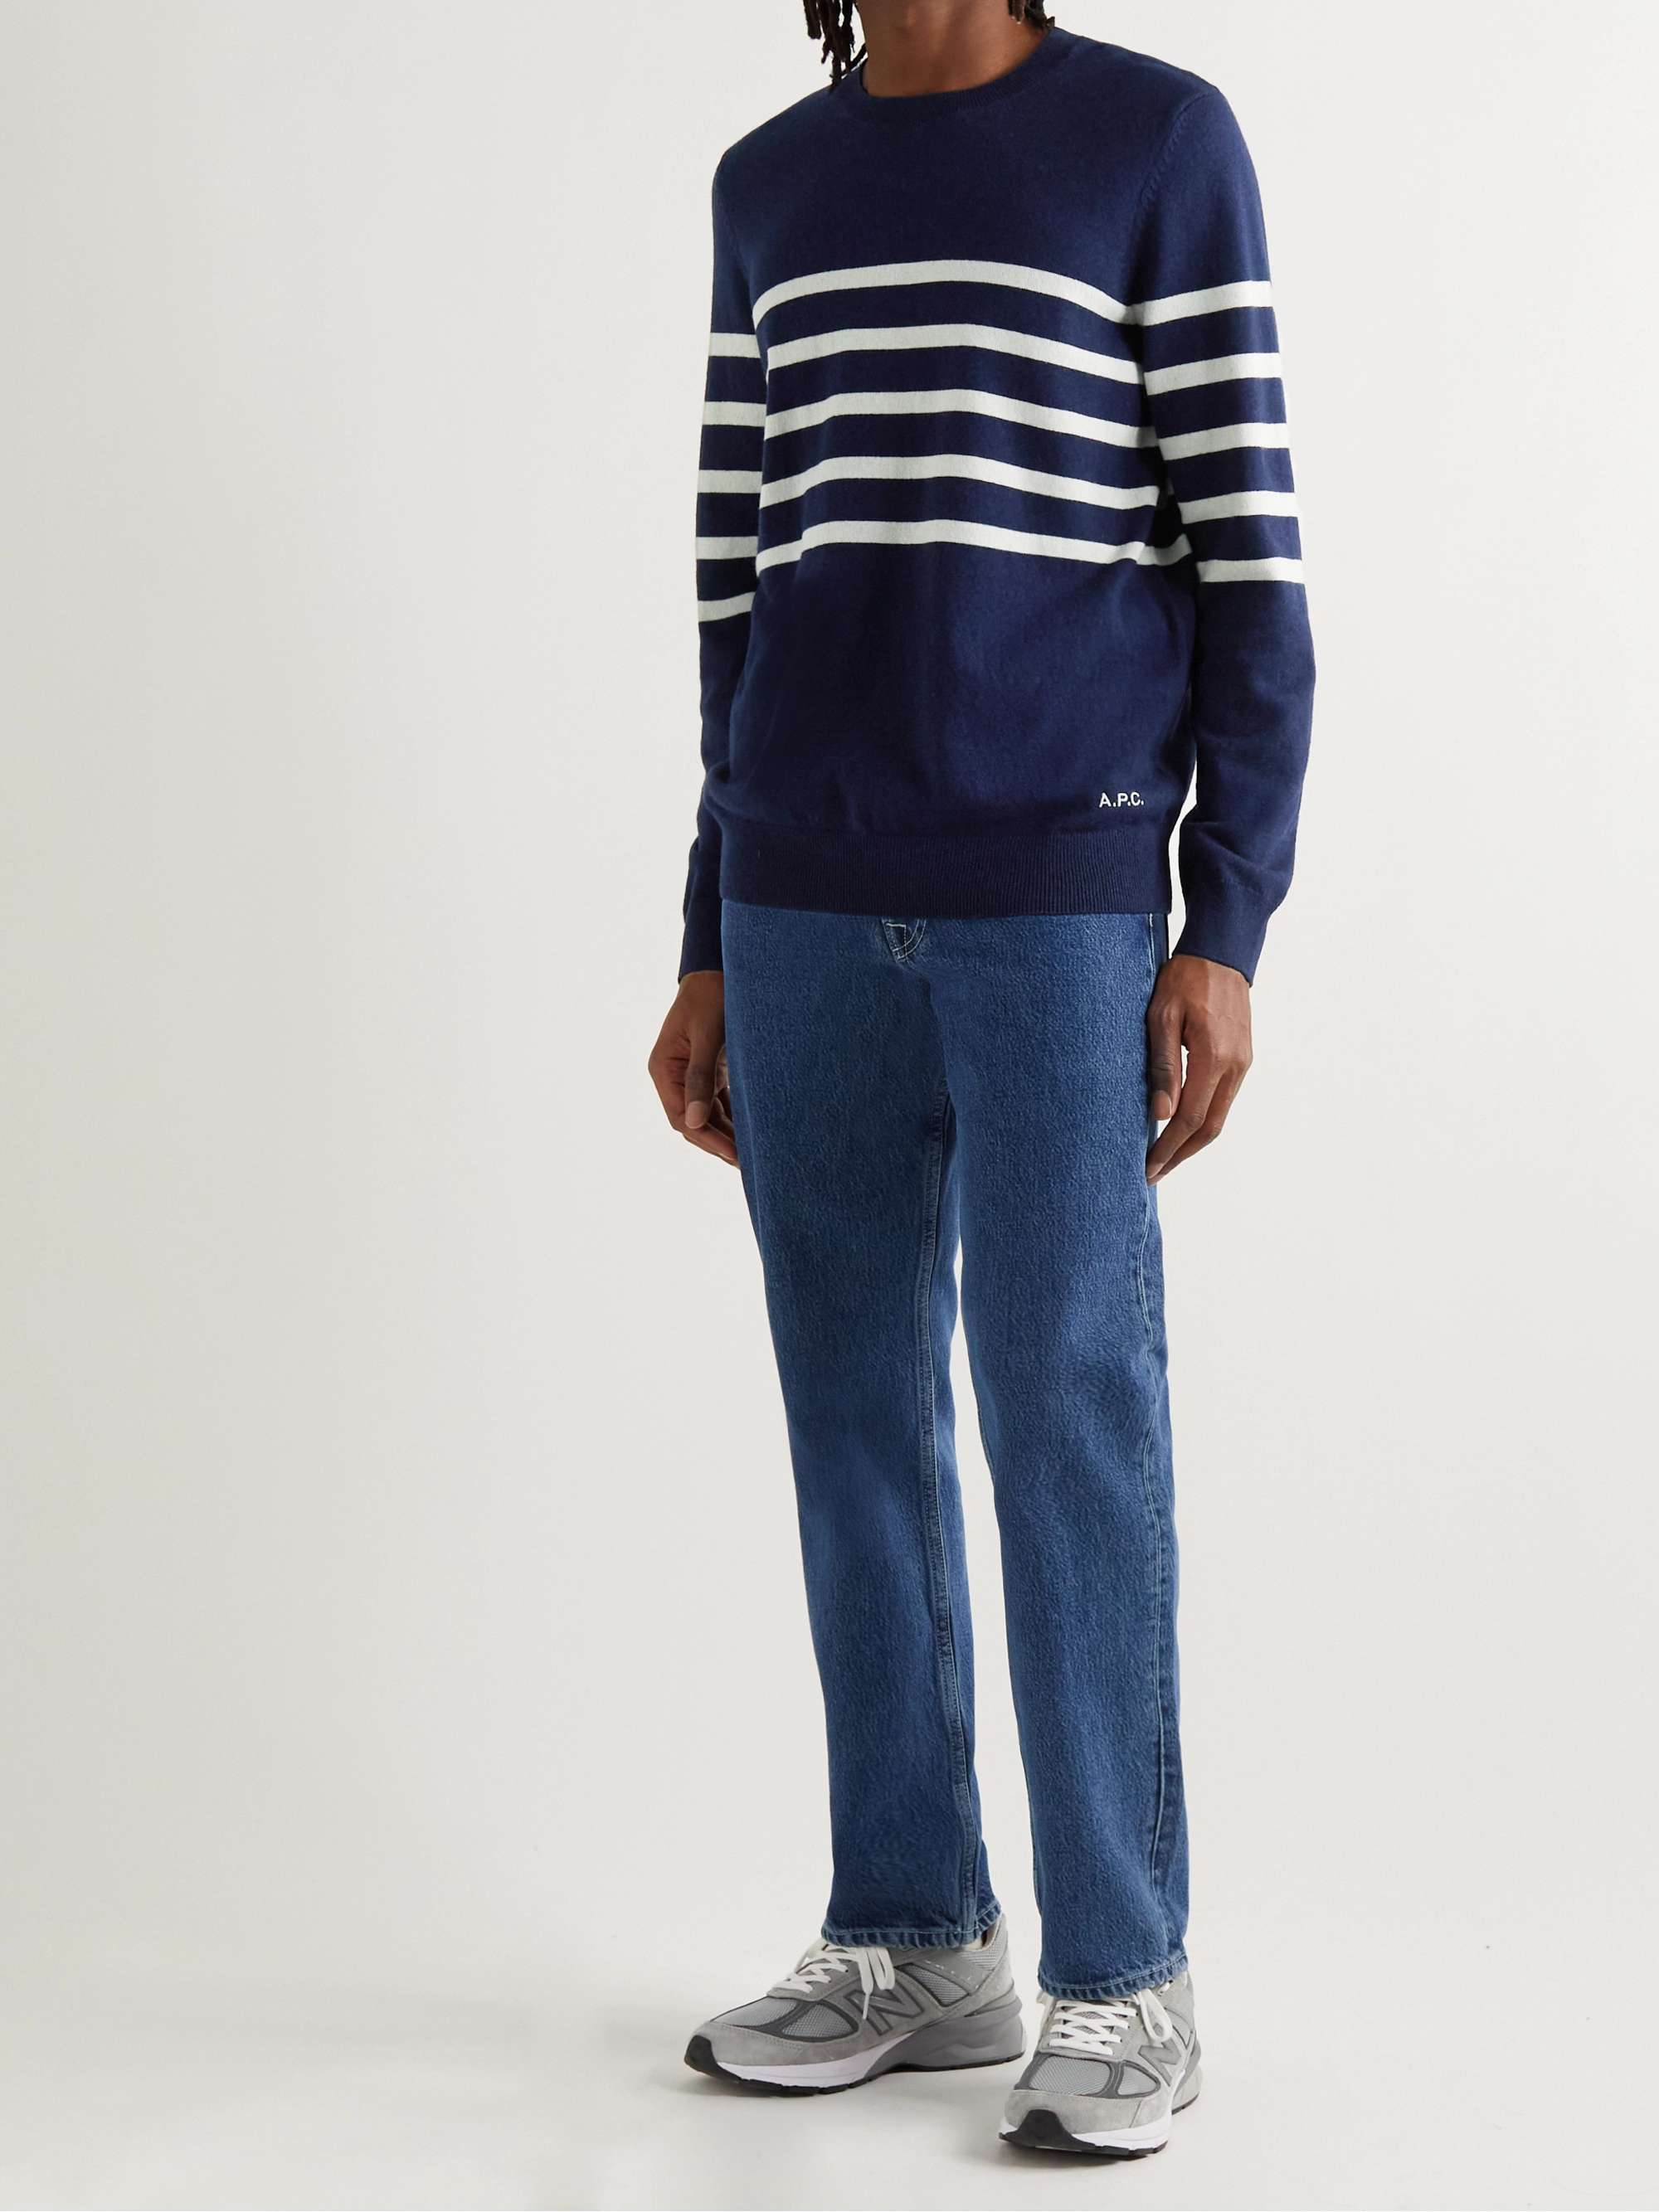 A.P.C. Maceo Logo-Embroidered Striped Cashmere and Cotton-Blend Sweater